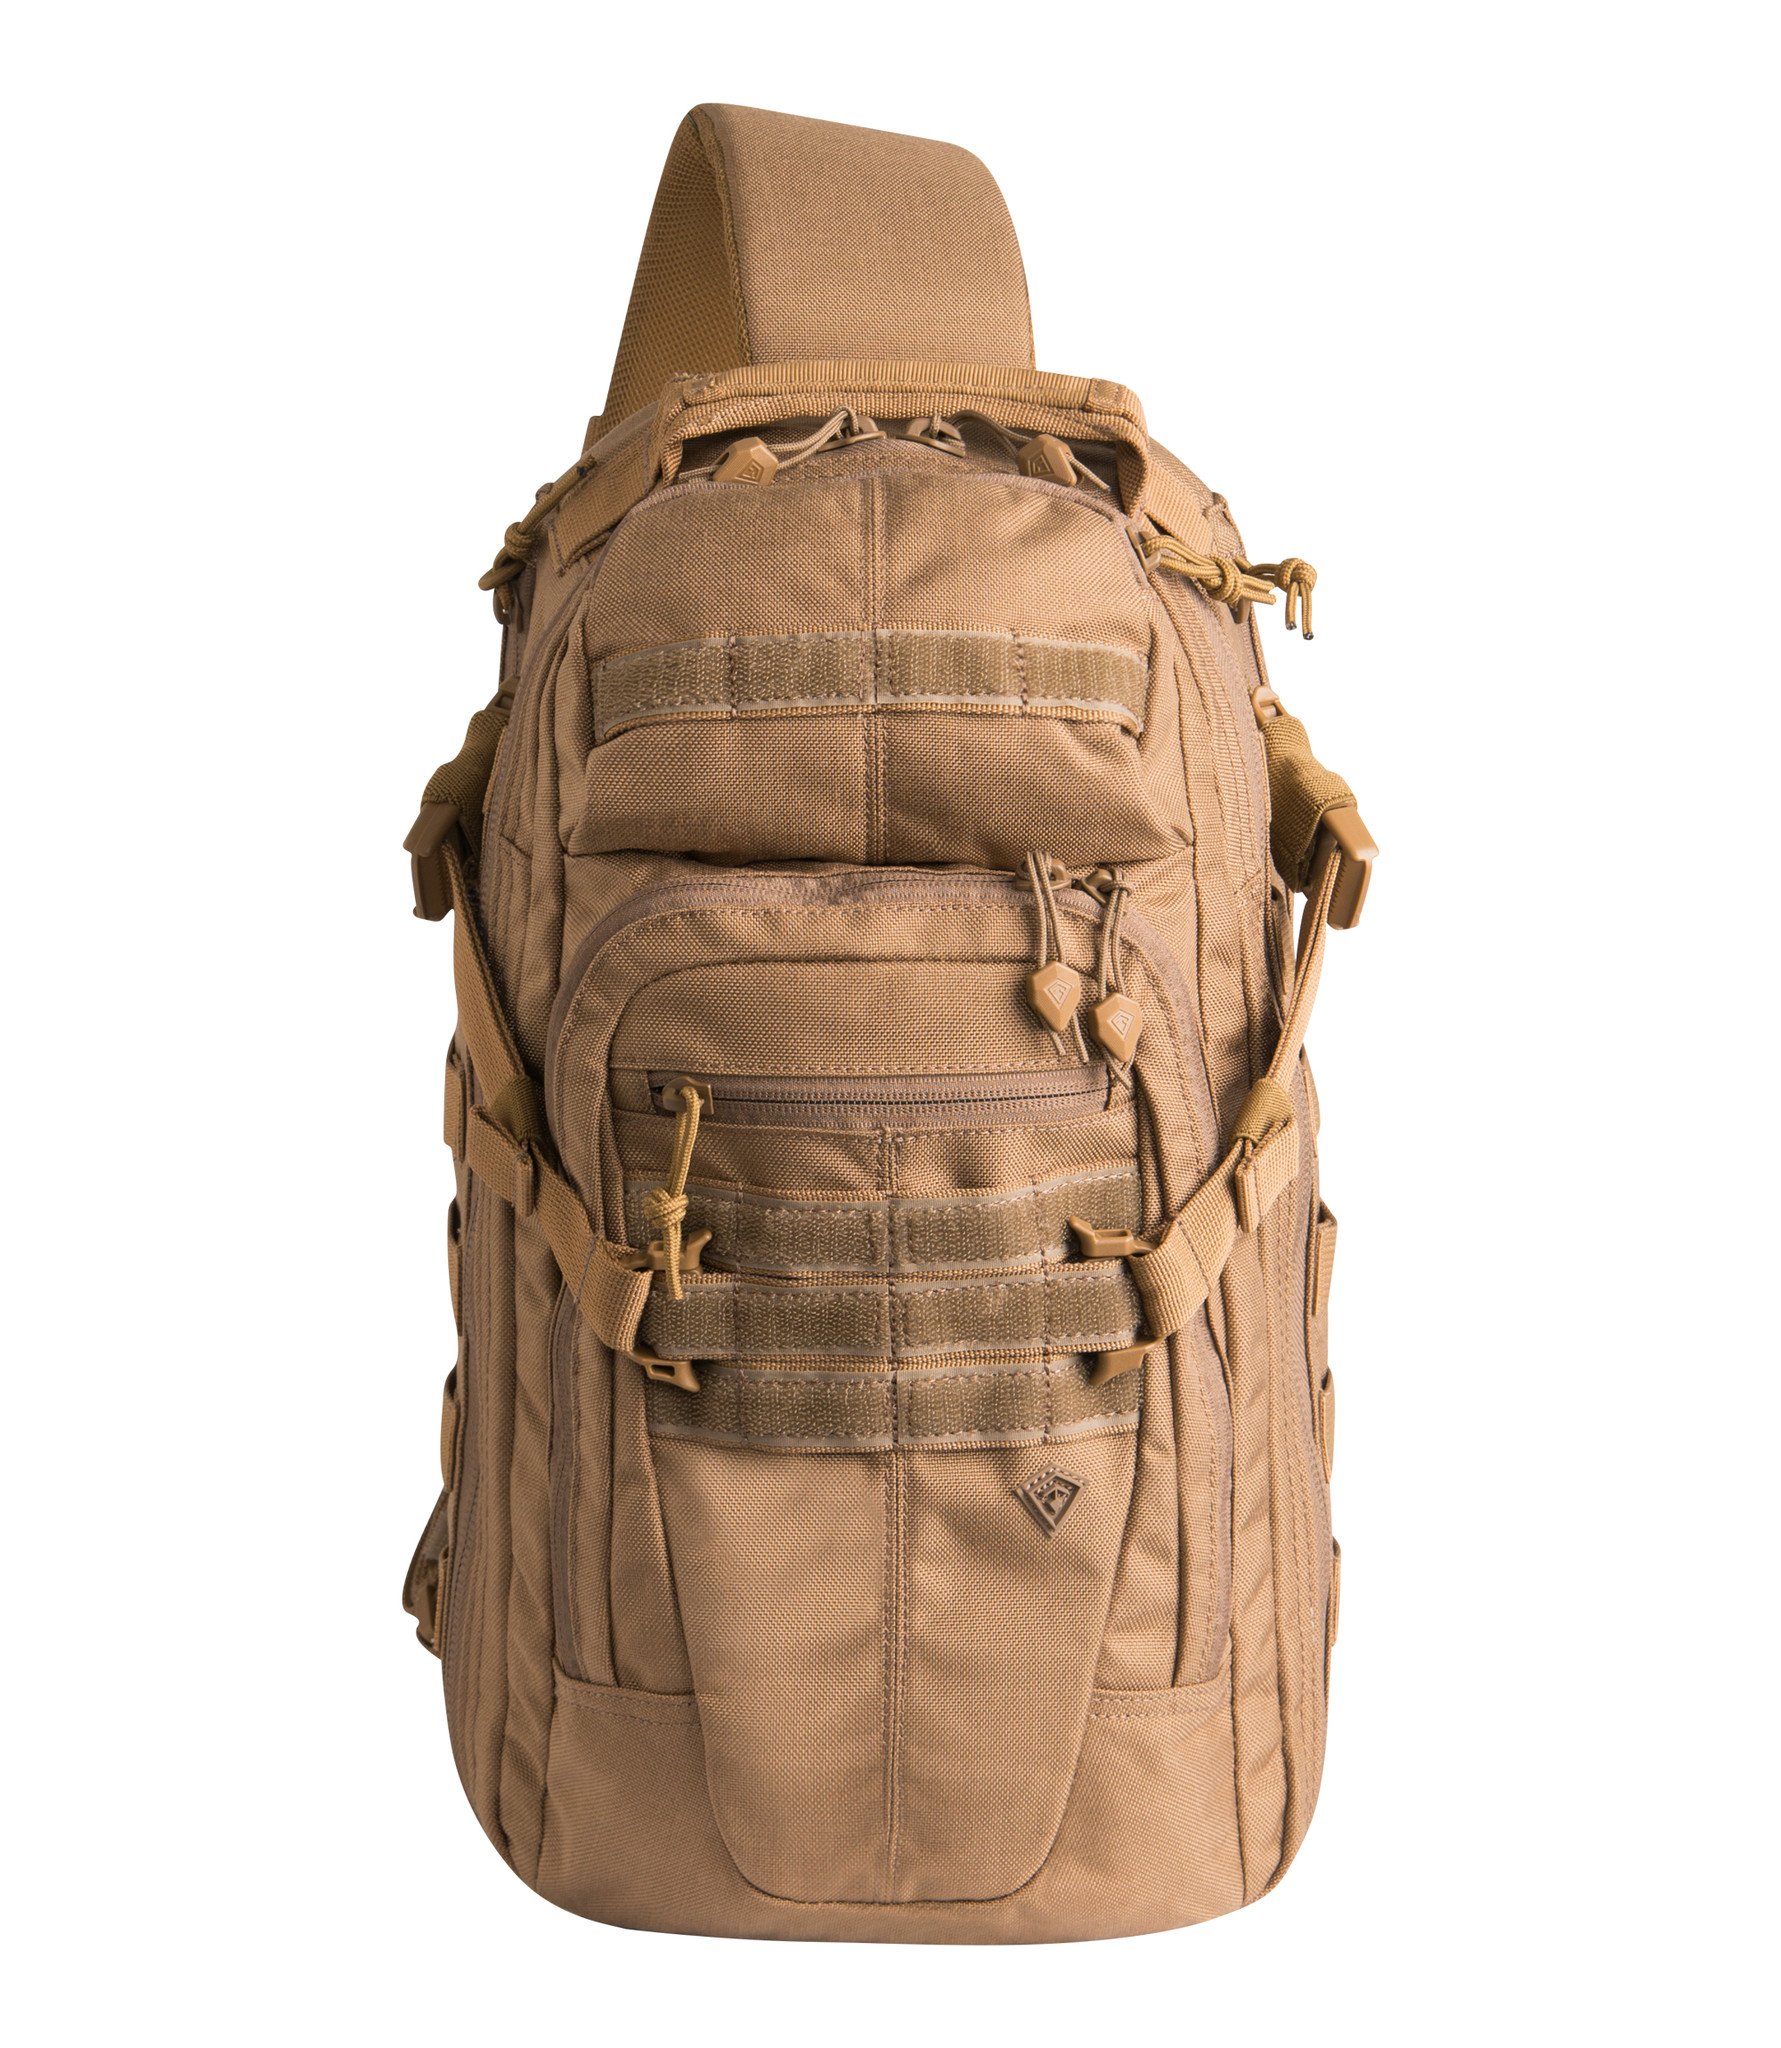 180011-crosshatch-sling-pack-le-coyote-front_2016